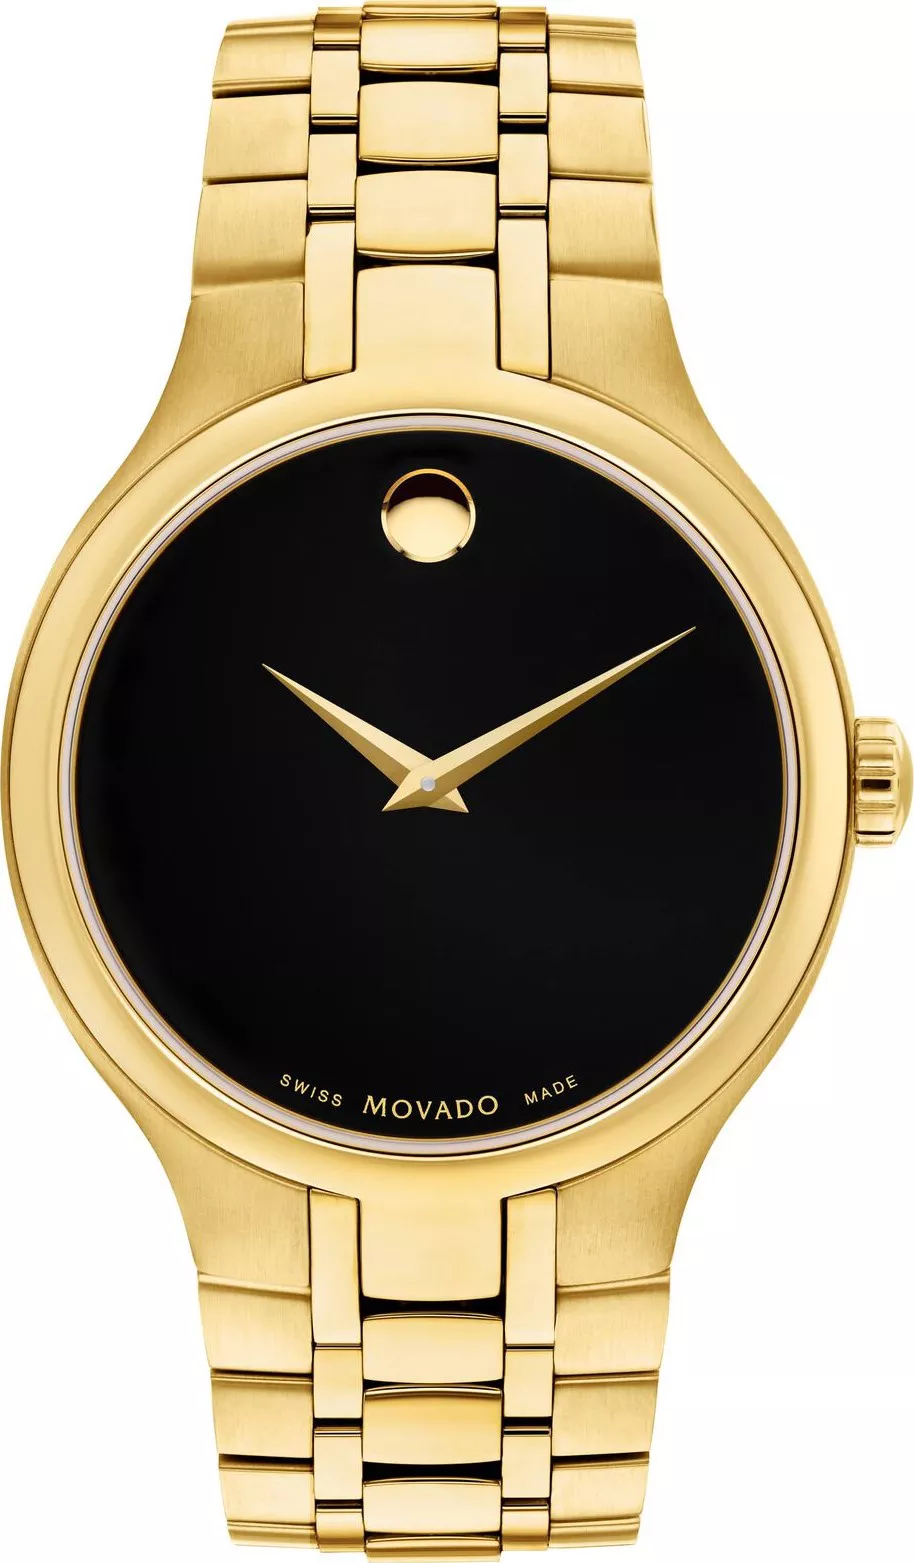 MSP: 102510 Movado Collection Watch 39mm 33,590,000